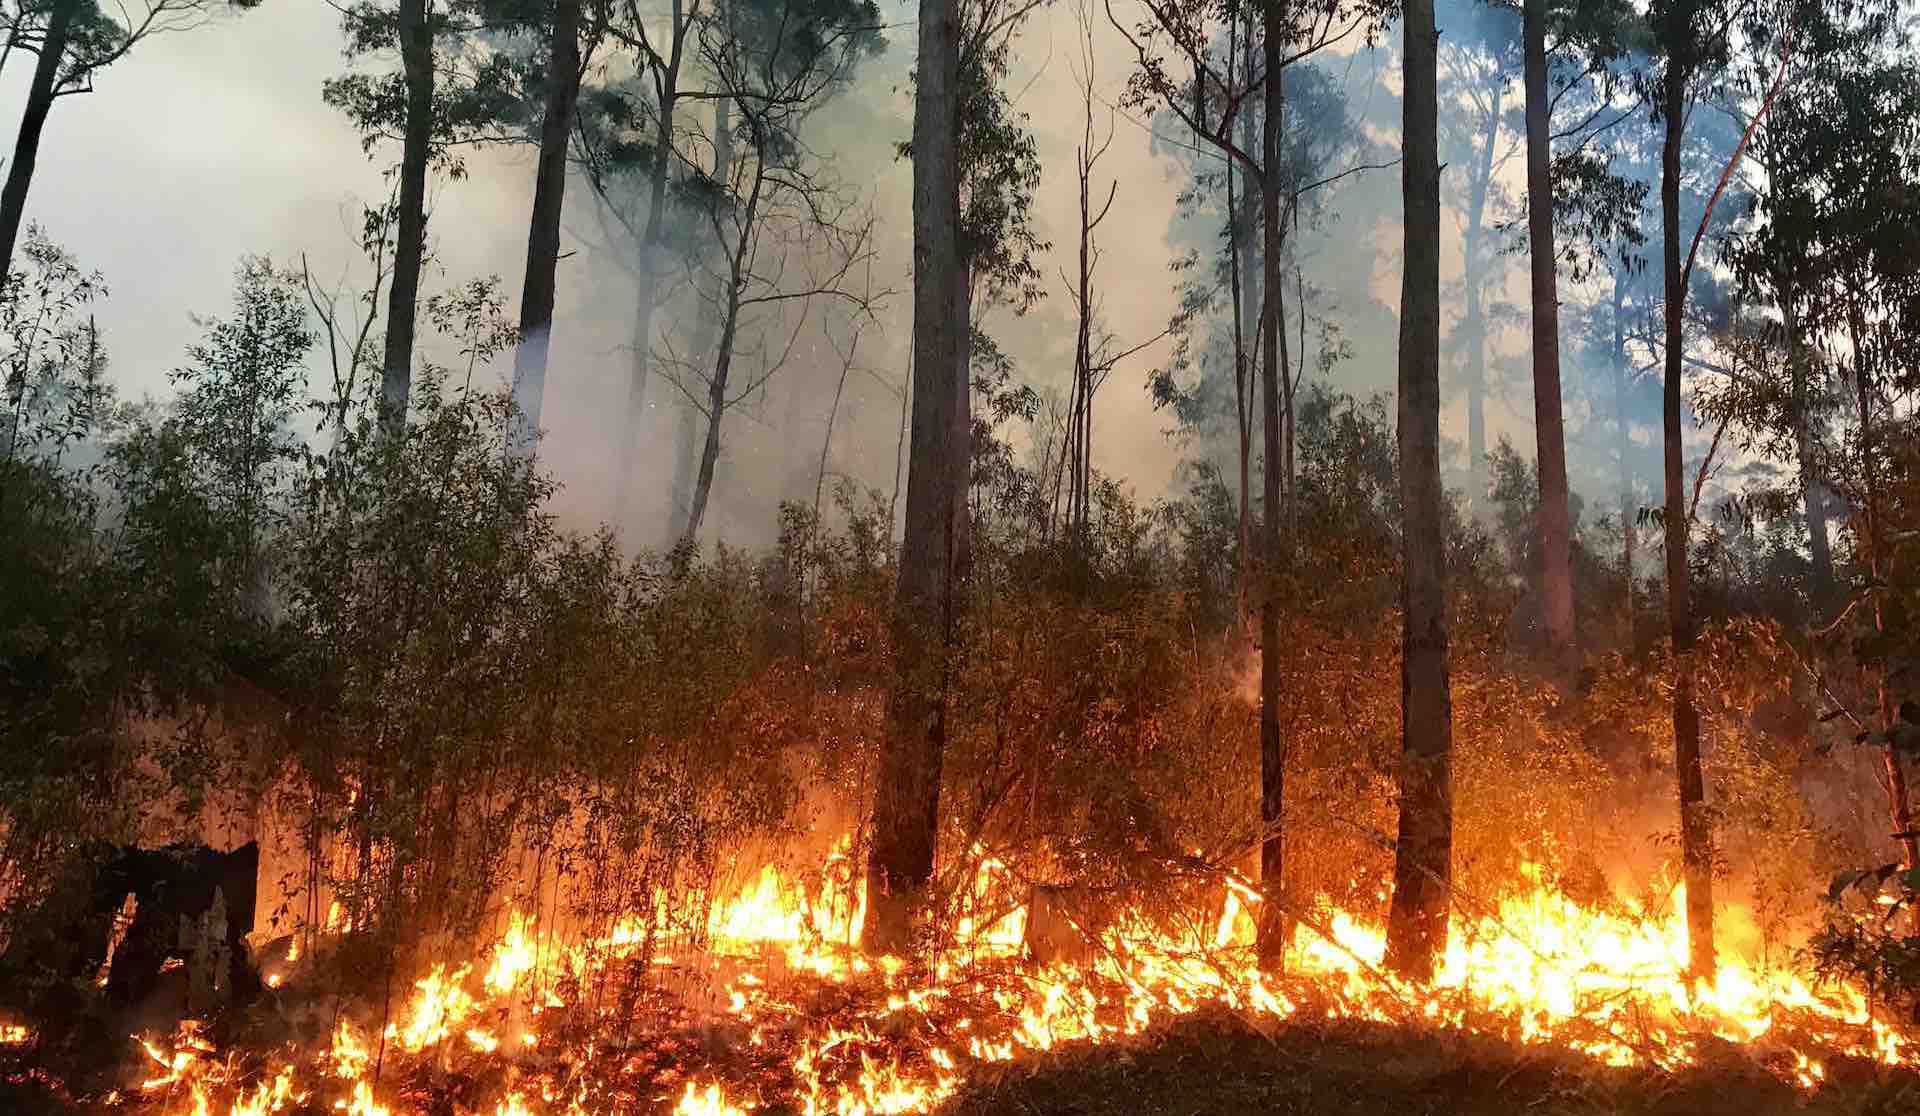 Spain has experienced the worst forest fires on record this year